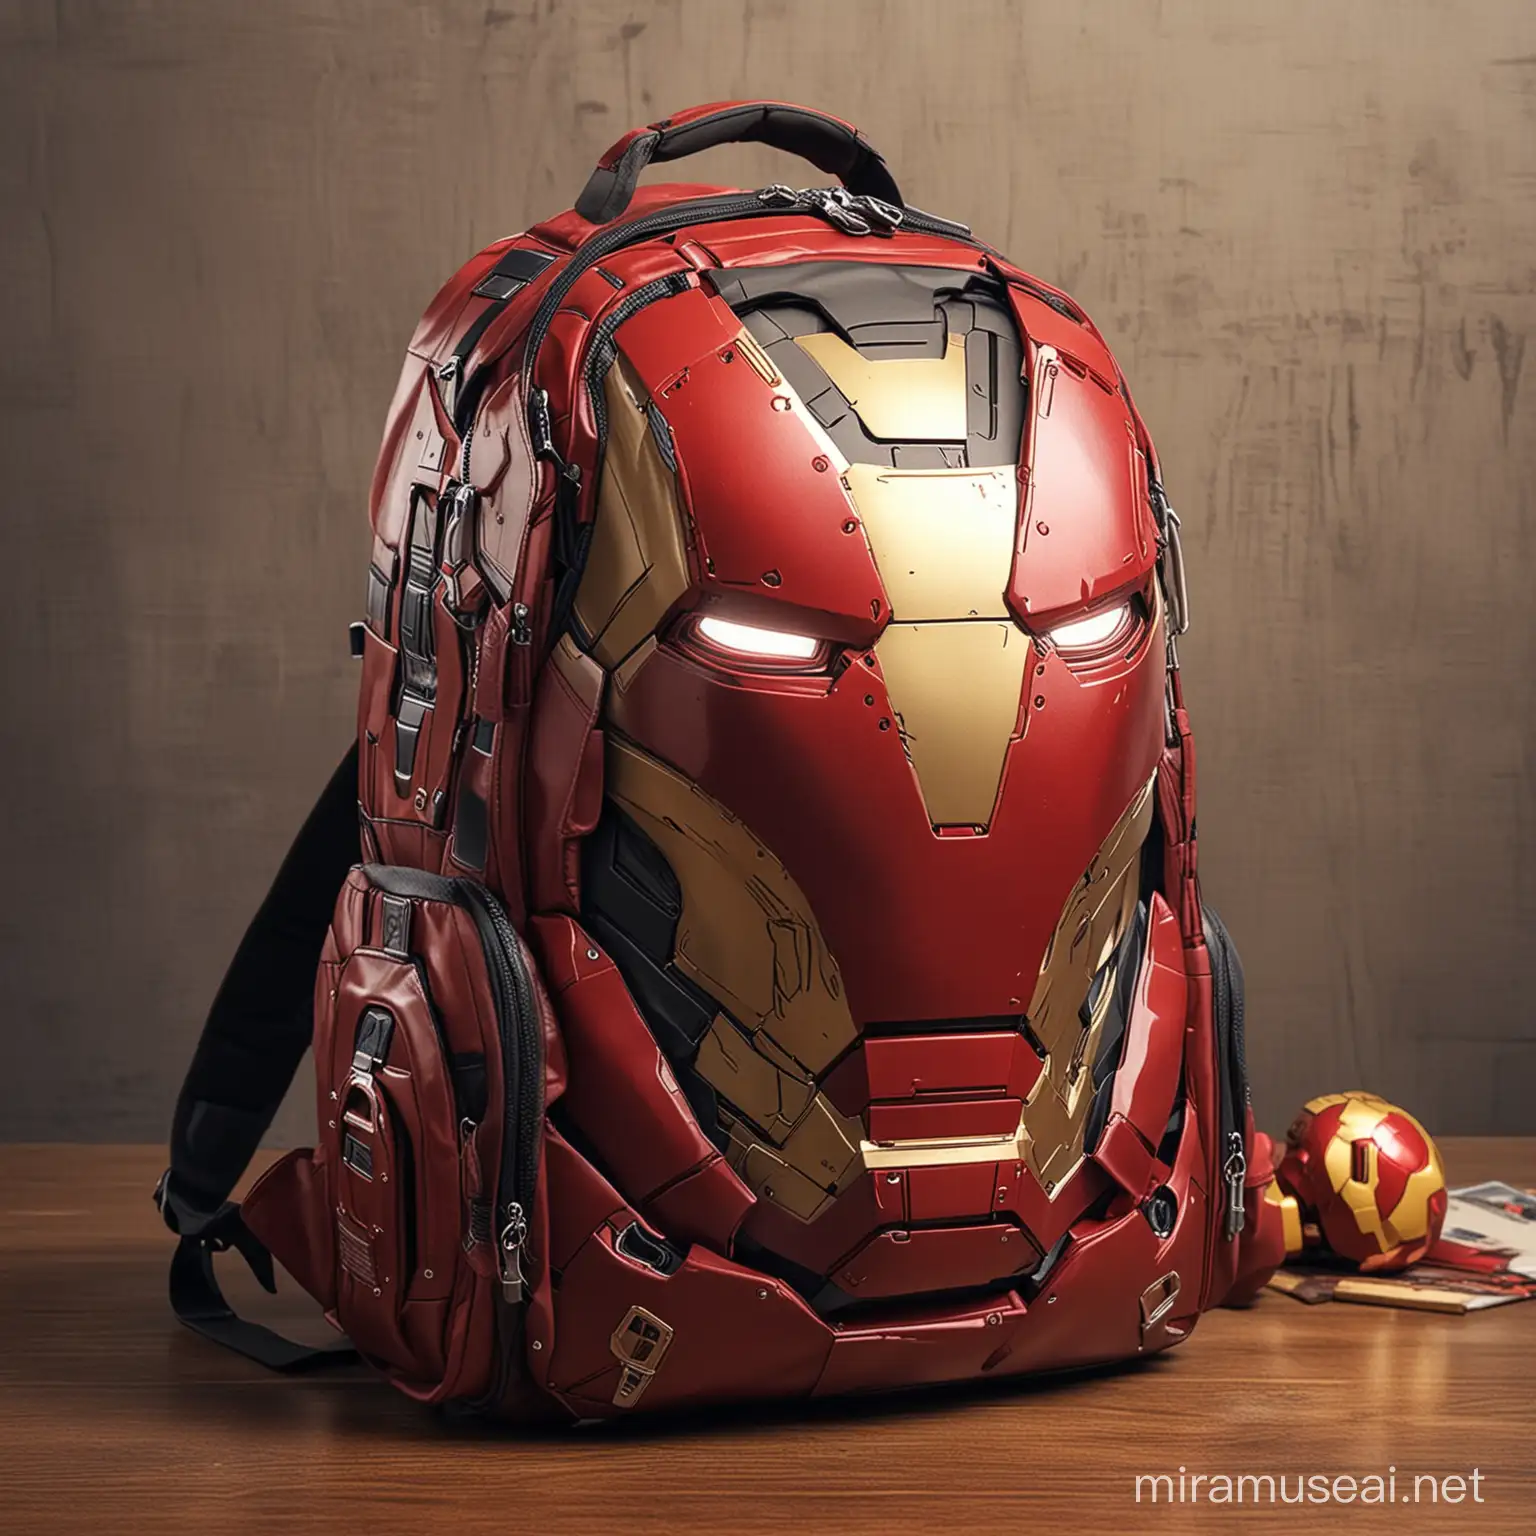 Iron Man Style Backpack on The Table